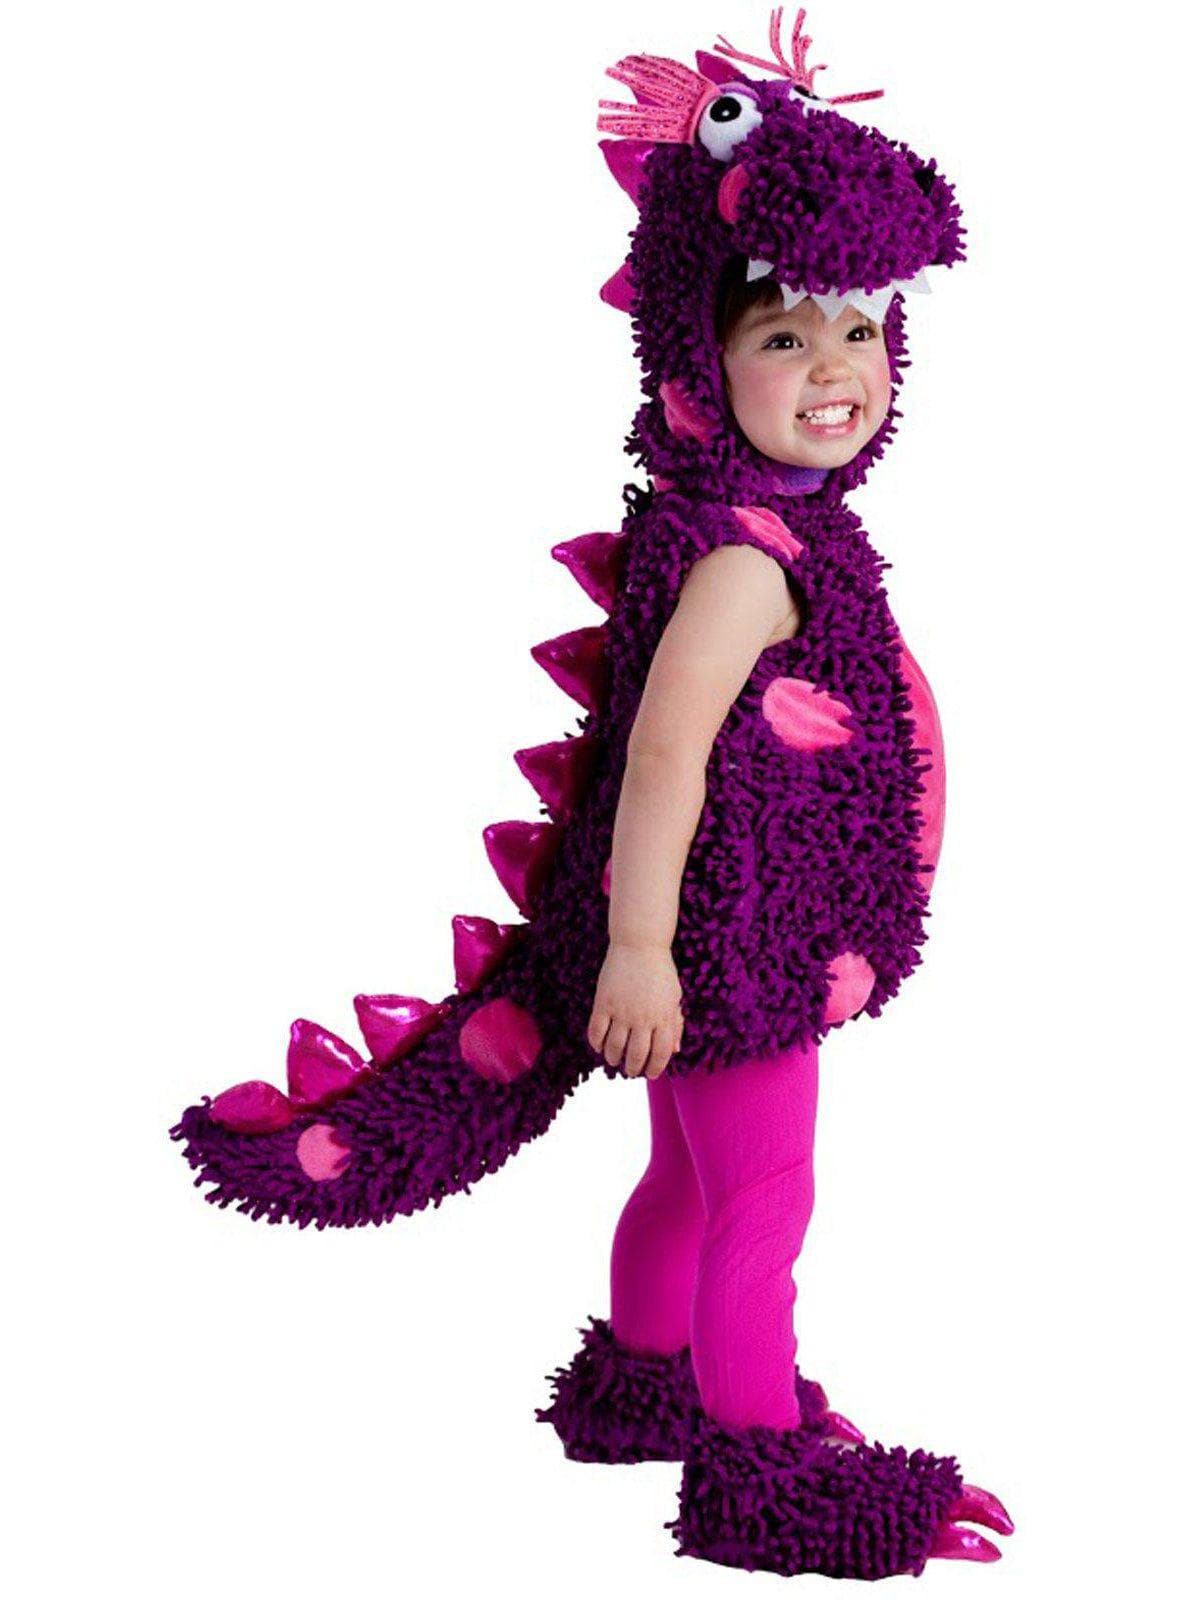 Baby/Toddler Paige the Dragon Costume - costumes.com